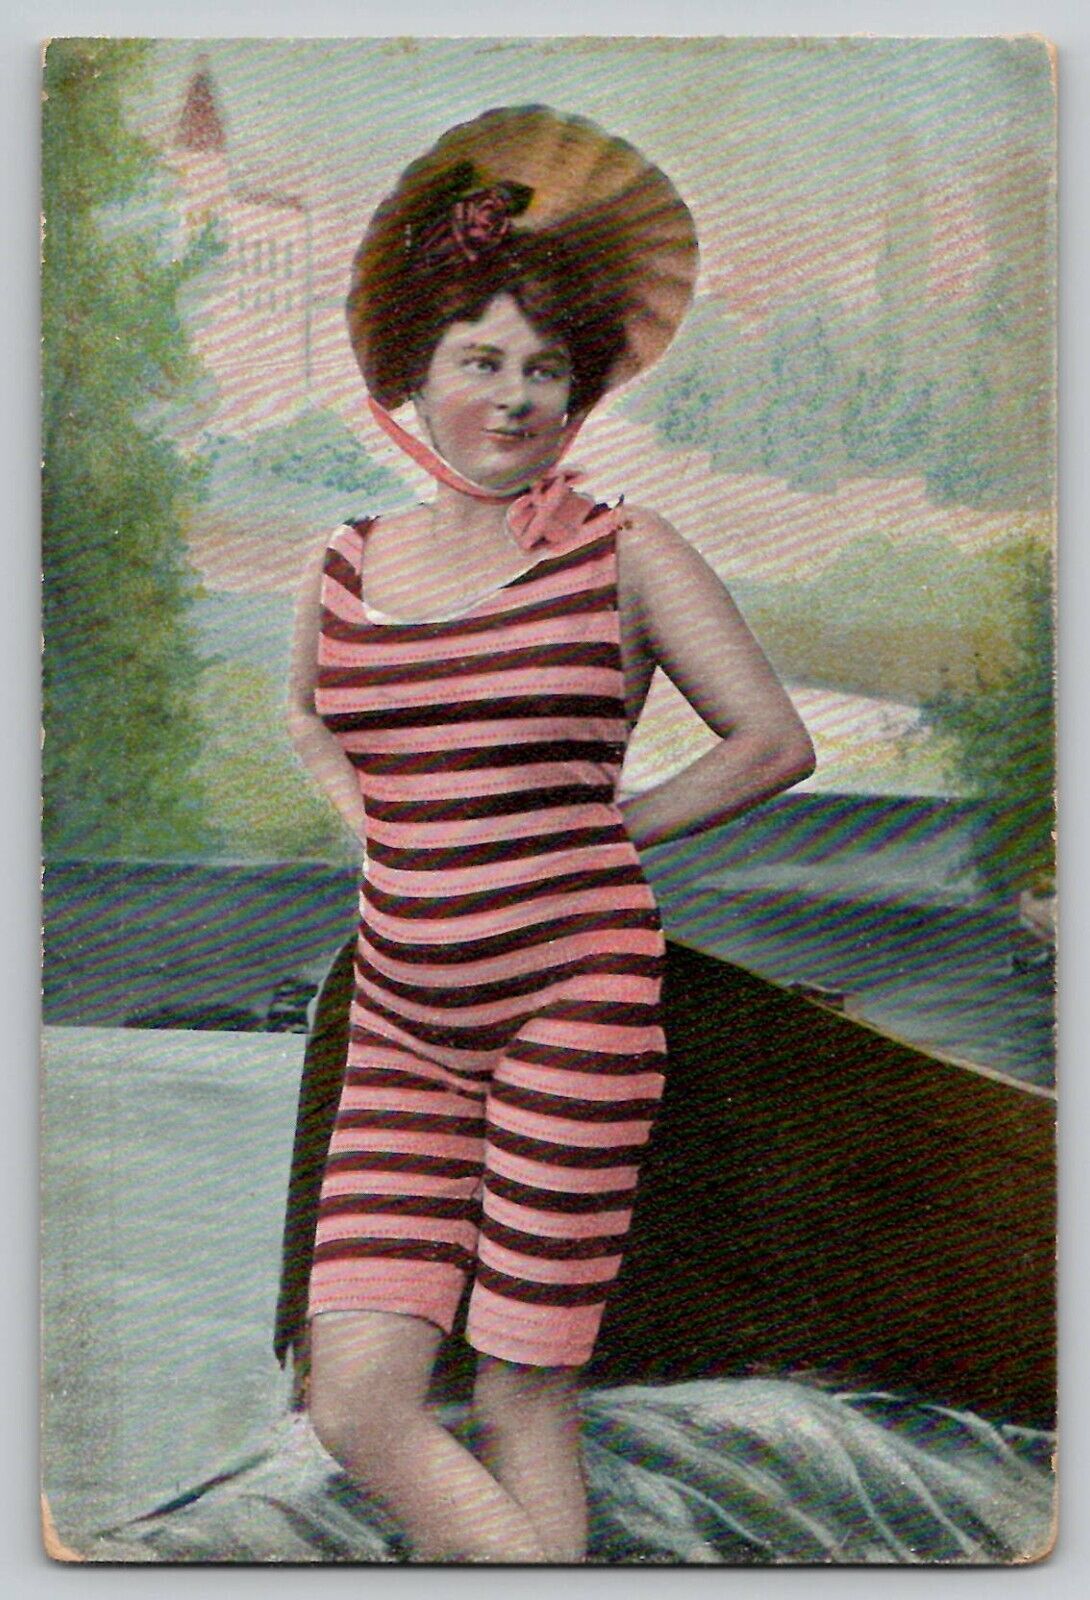 c 1910's Bathing Beauty Woman Stripped Swimming Suit Boat Vintage Postcard 326